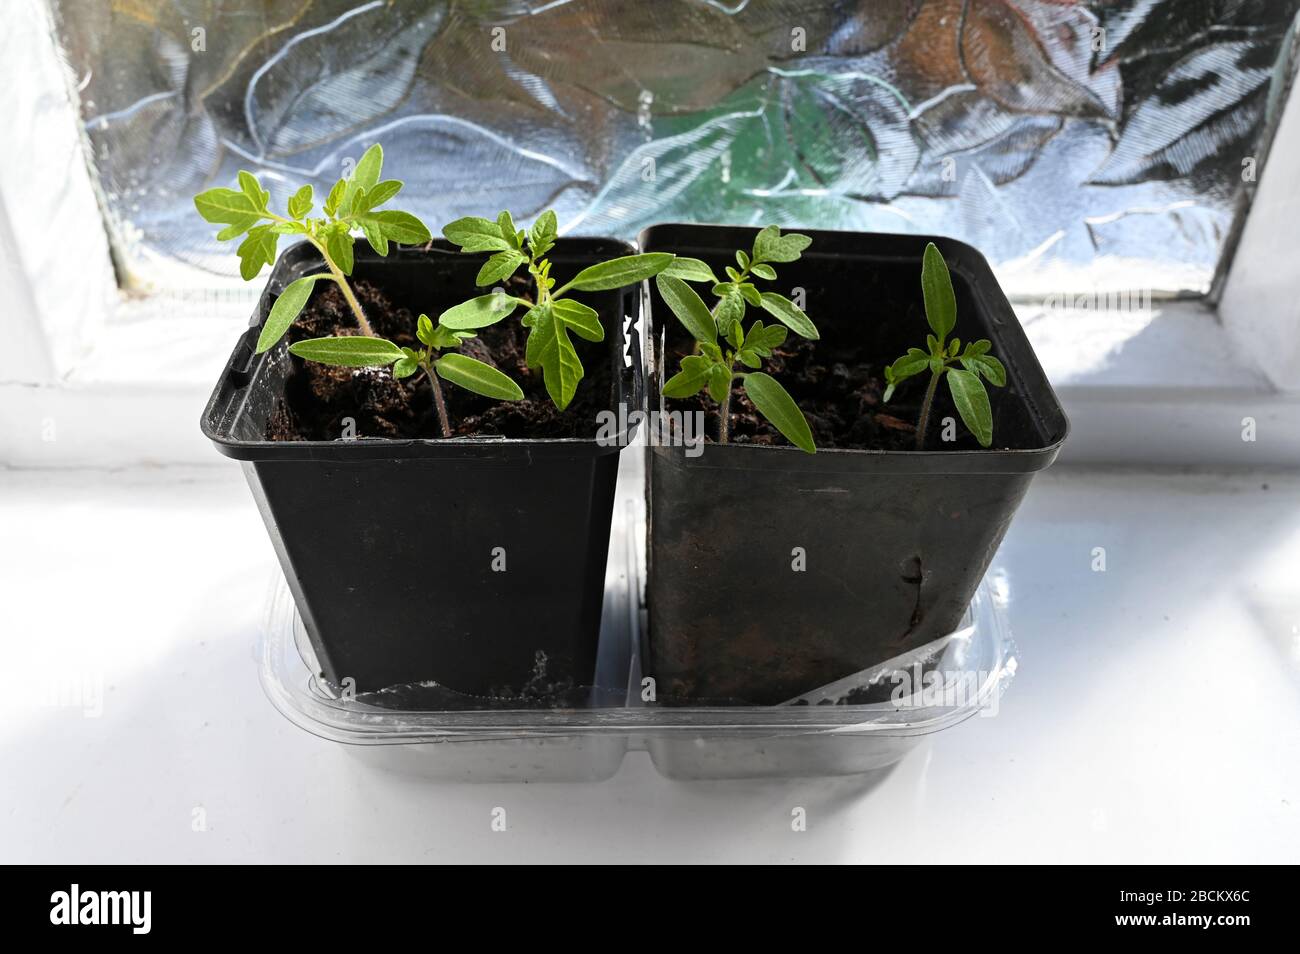 Tomato plant seedlings growing in pots on a bright window sill (Gardeners Delight on the left and Pomodoro on the right.) Stock Photo